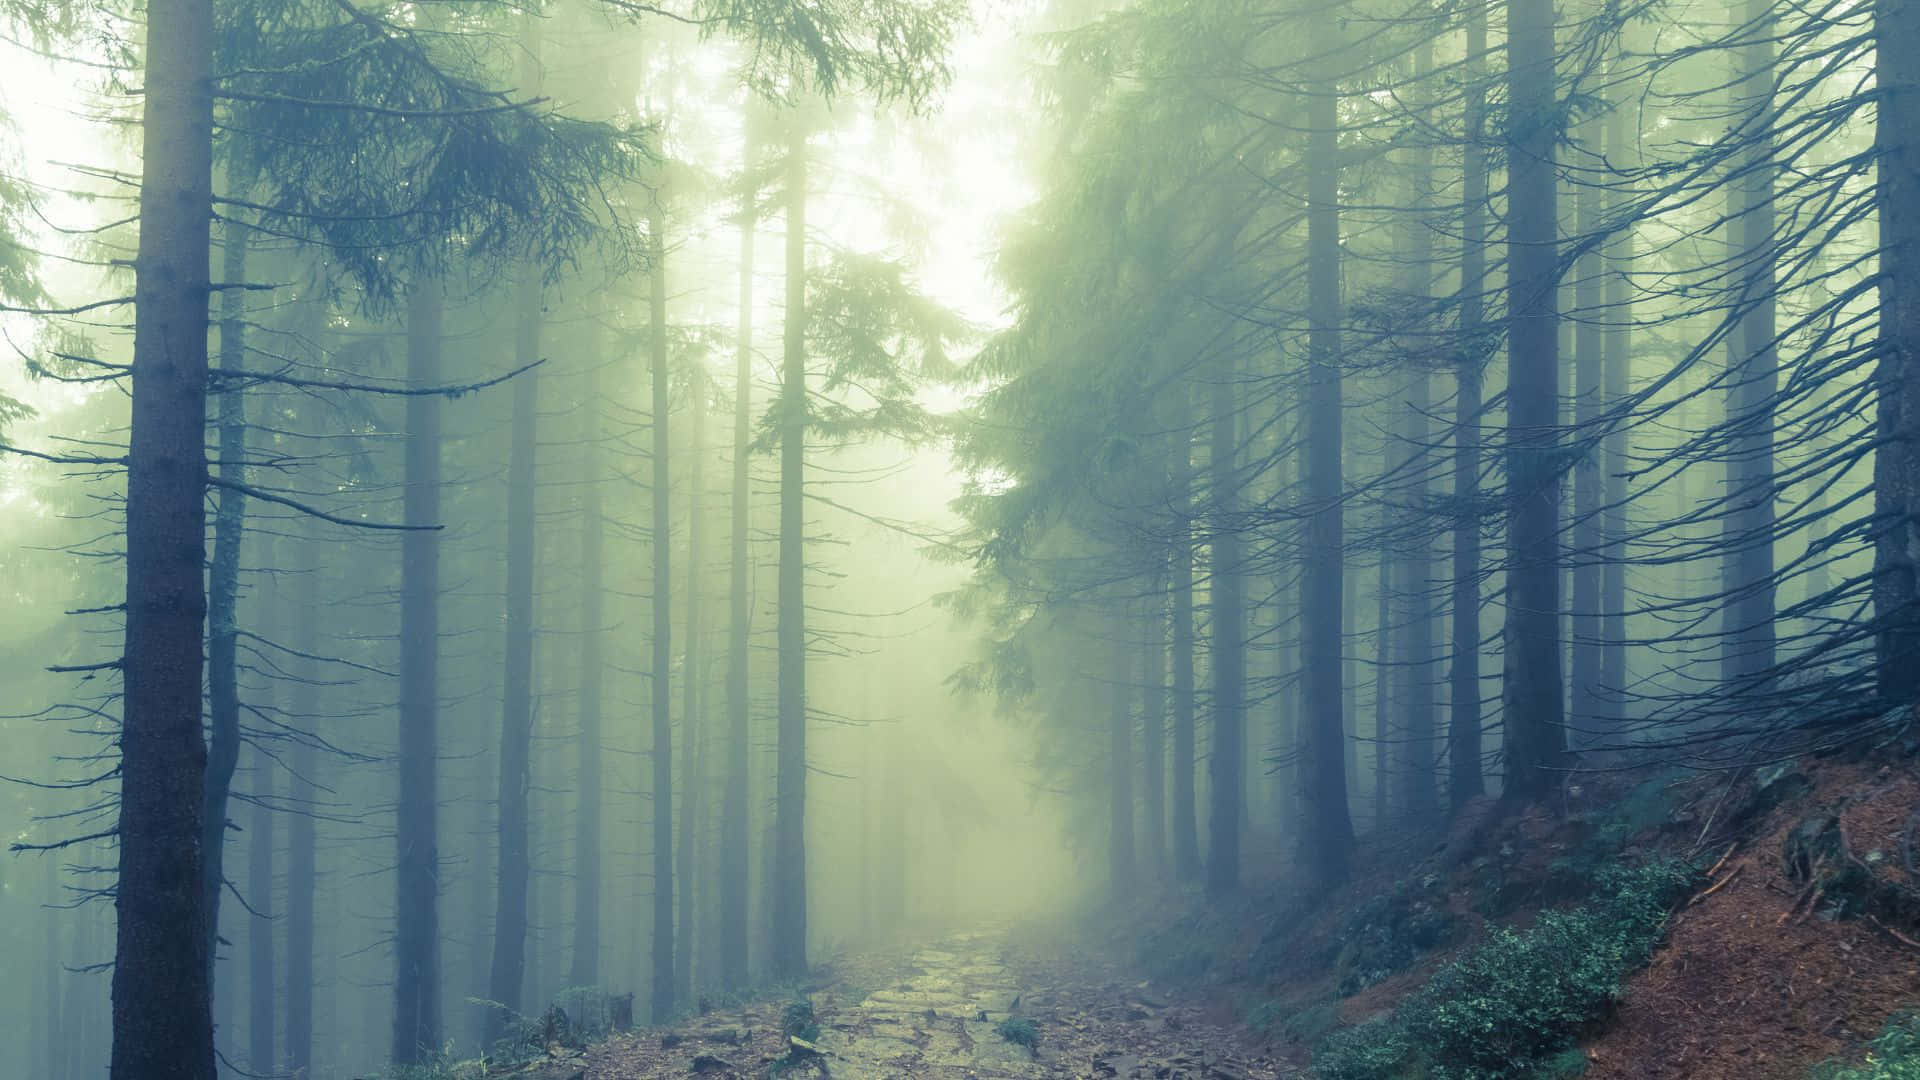 Abandoned and eerie, explore the Haunted Forests. Wallpaper